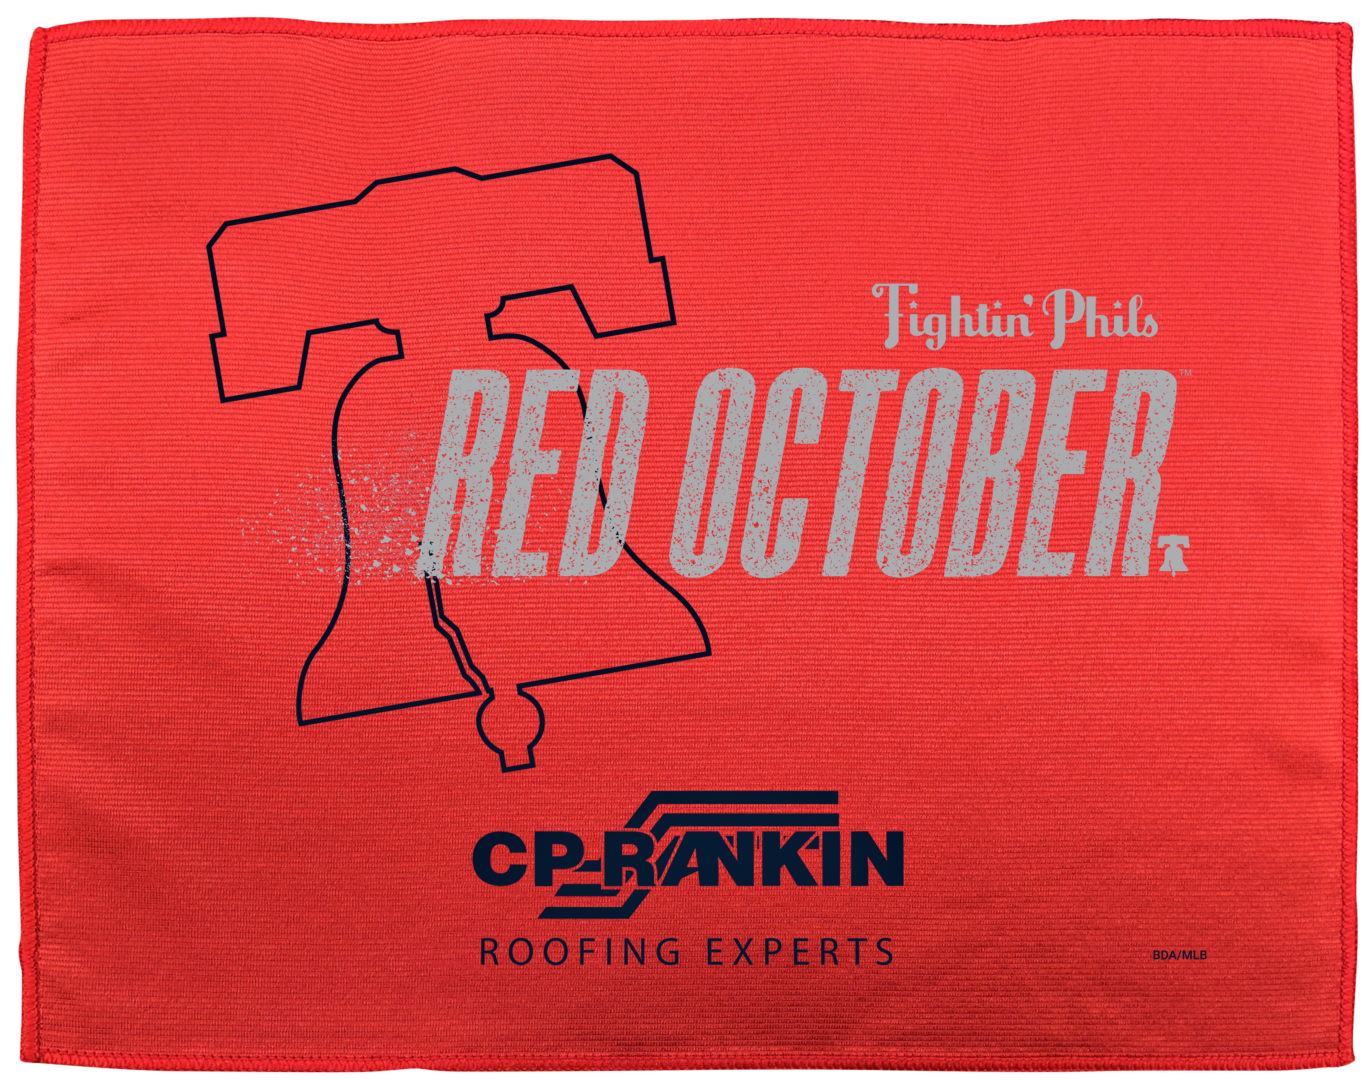 Red October text on red color cloth